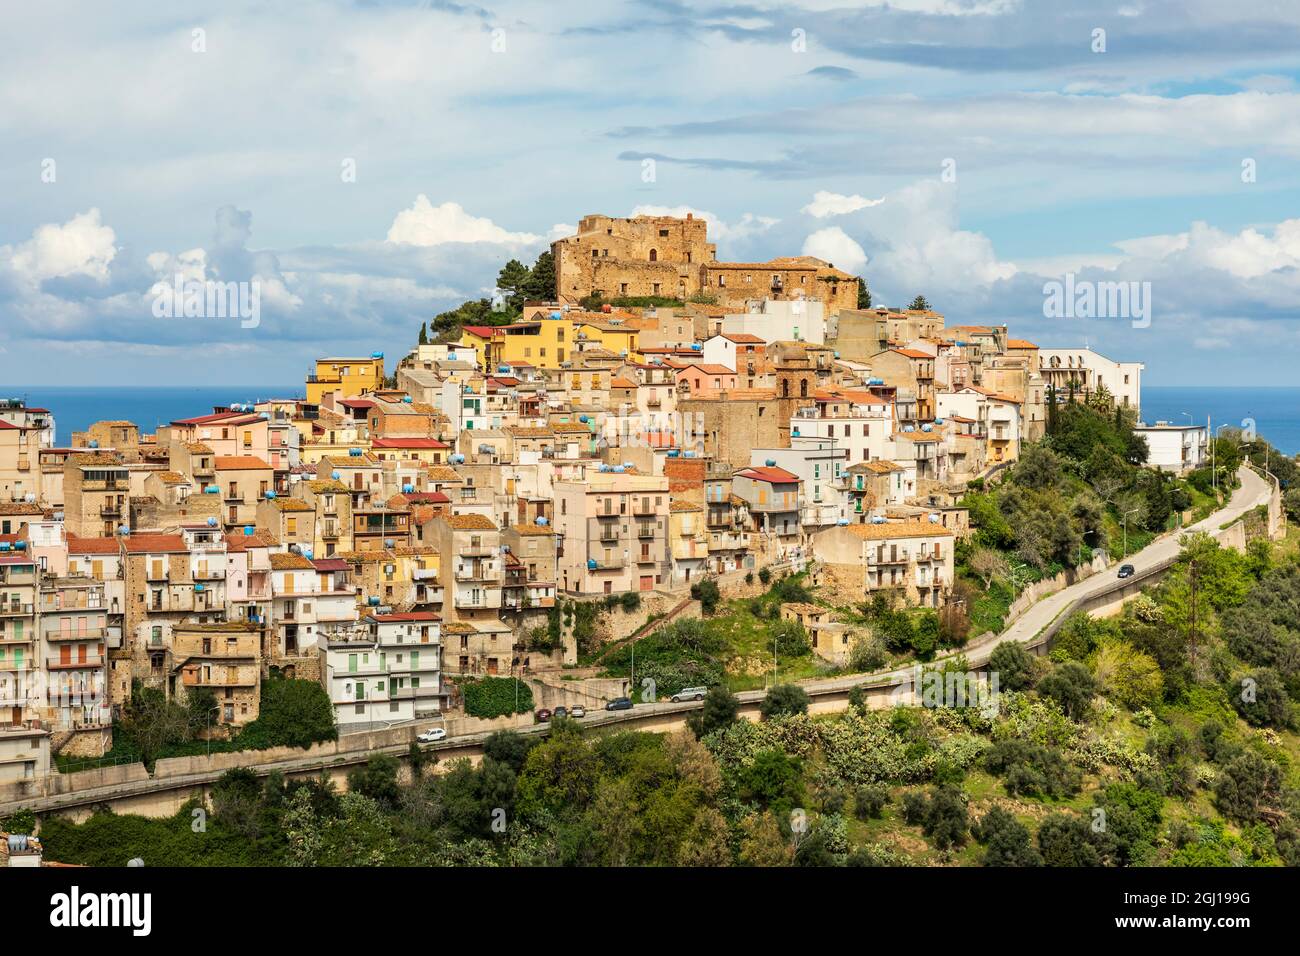 Italy, Sicily, Messina Province, Caronia. The medieval hilltop town Caronia, built around a Norman castle. Stock Photo